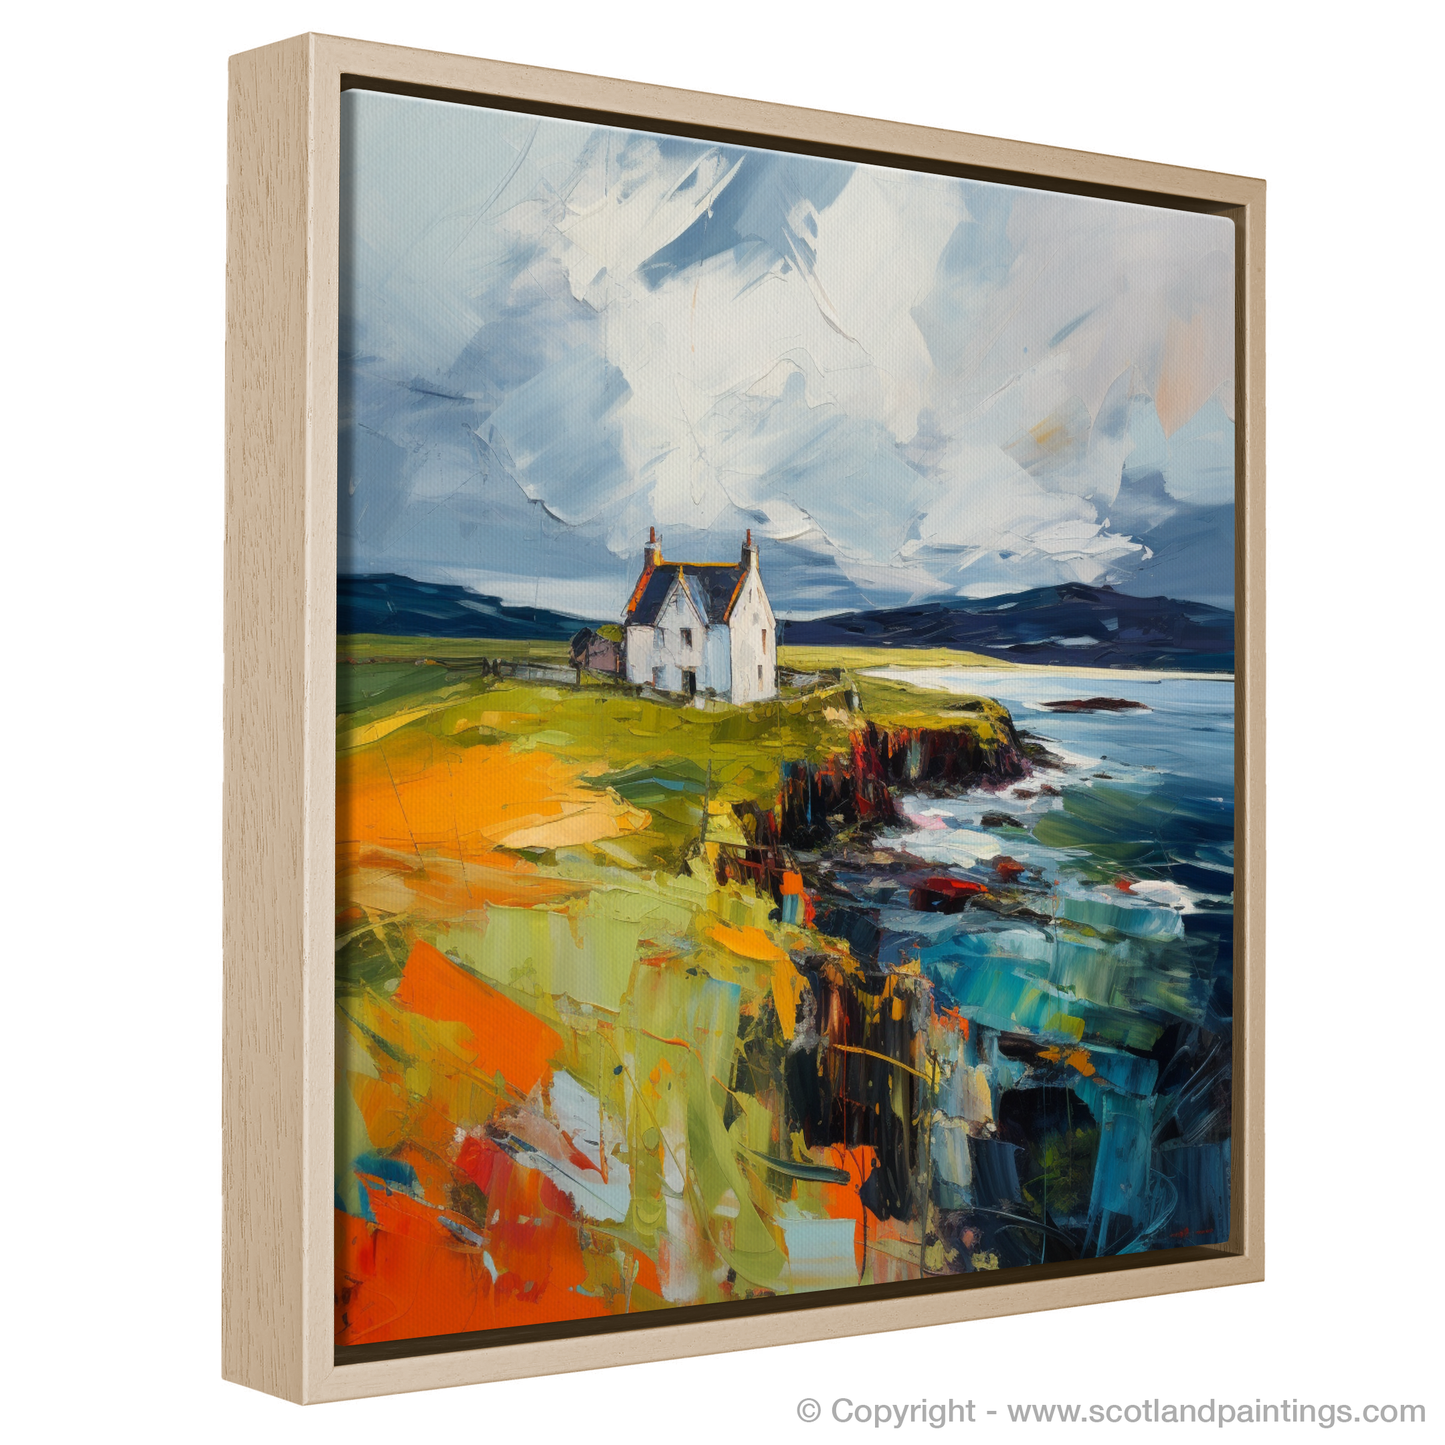 Painting and Art Print of Orkney, North of mainland Scotland entitled "Orkney Unleashed: An Expressionist Ode to Rugged Beauty".